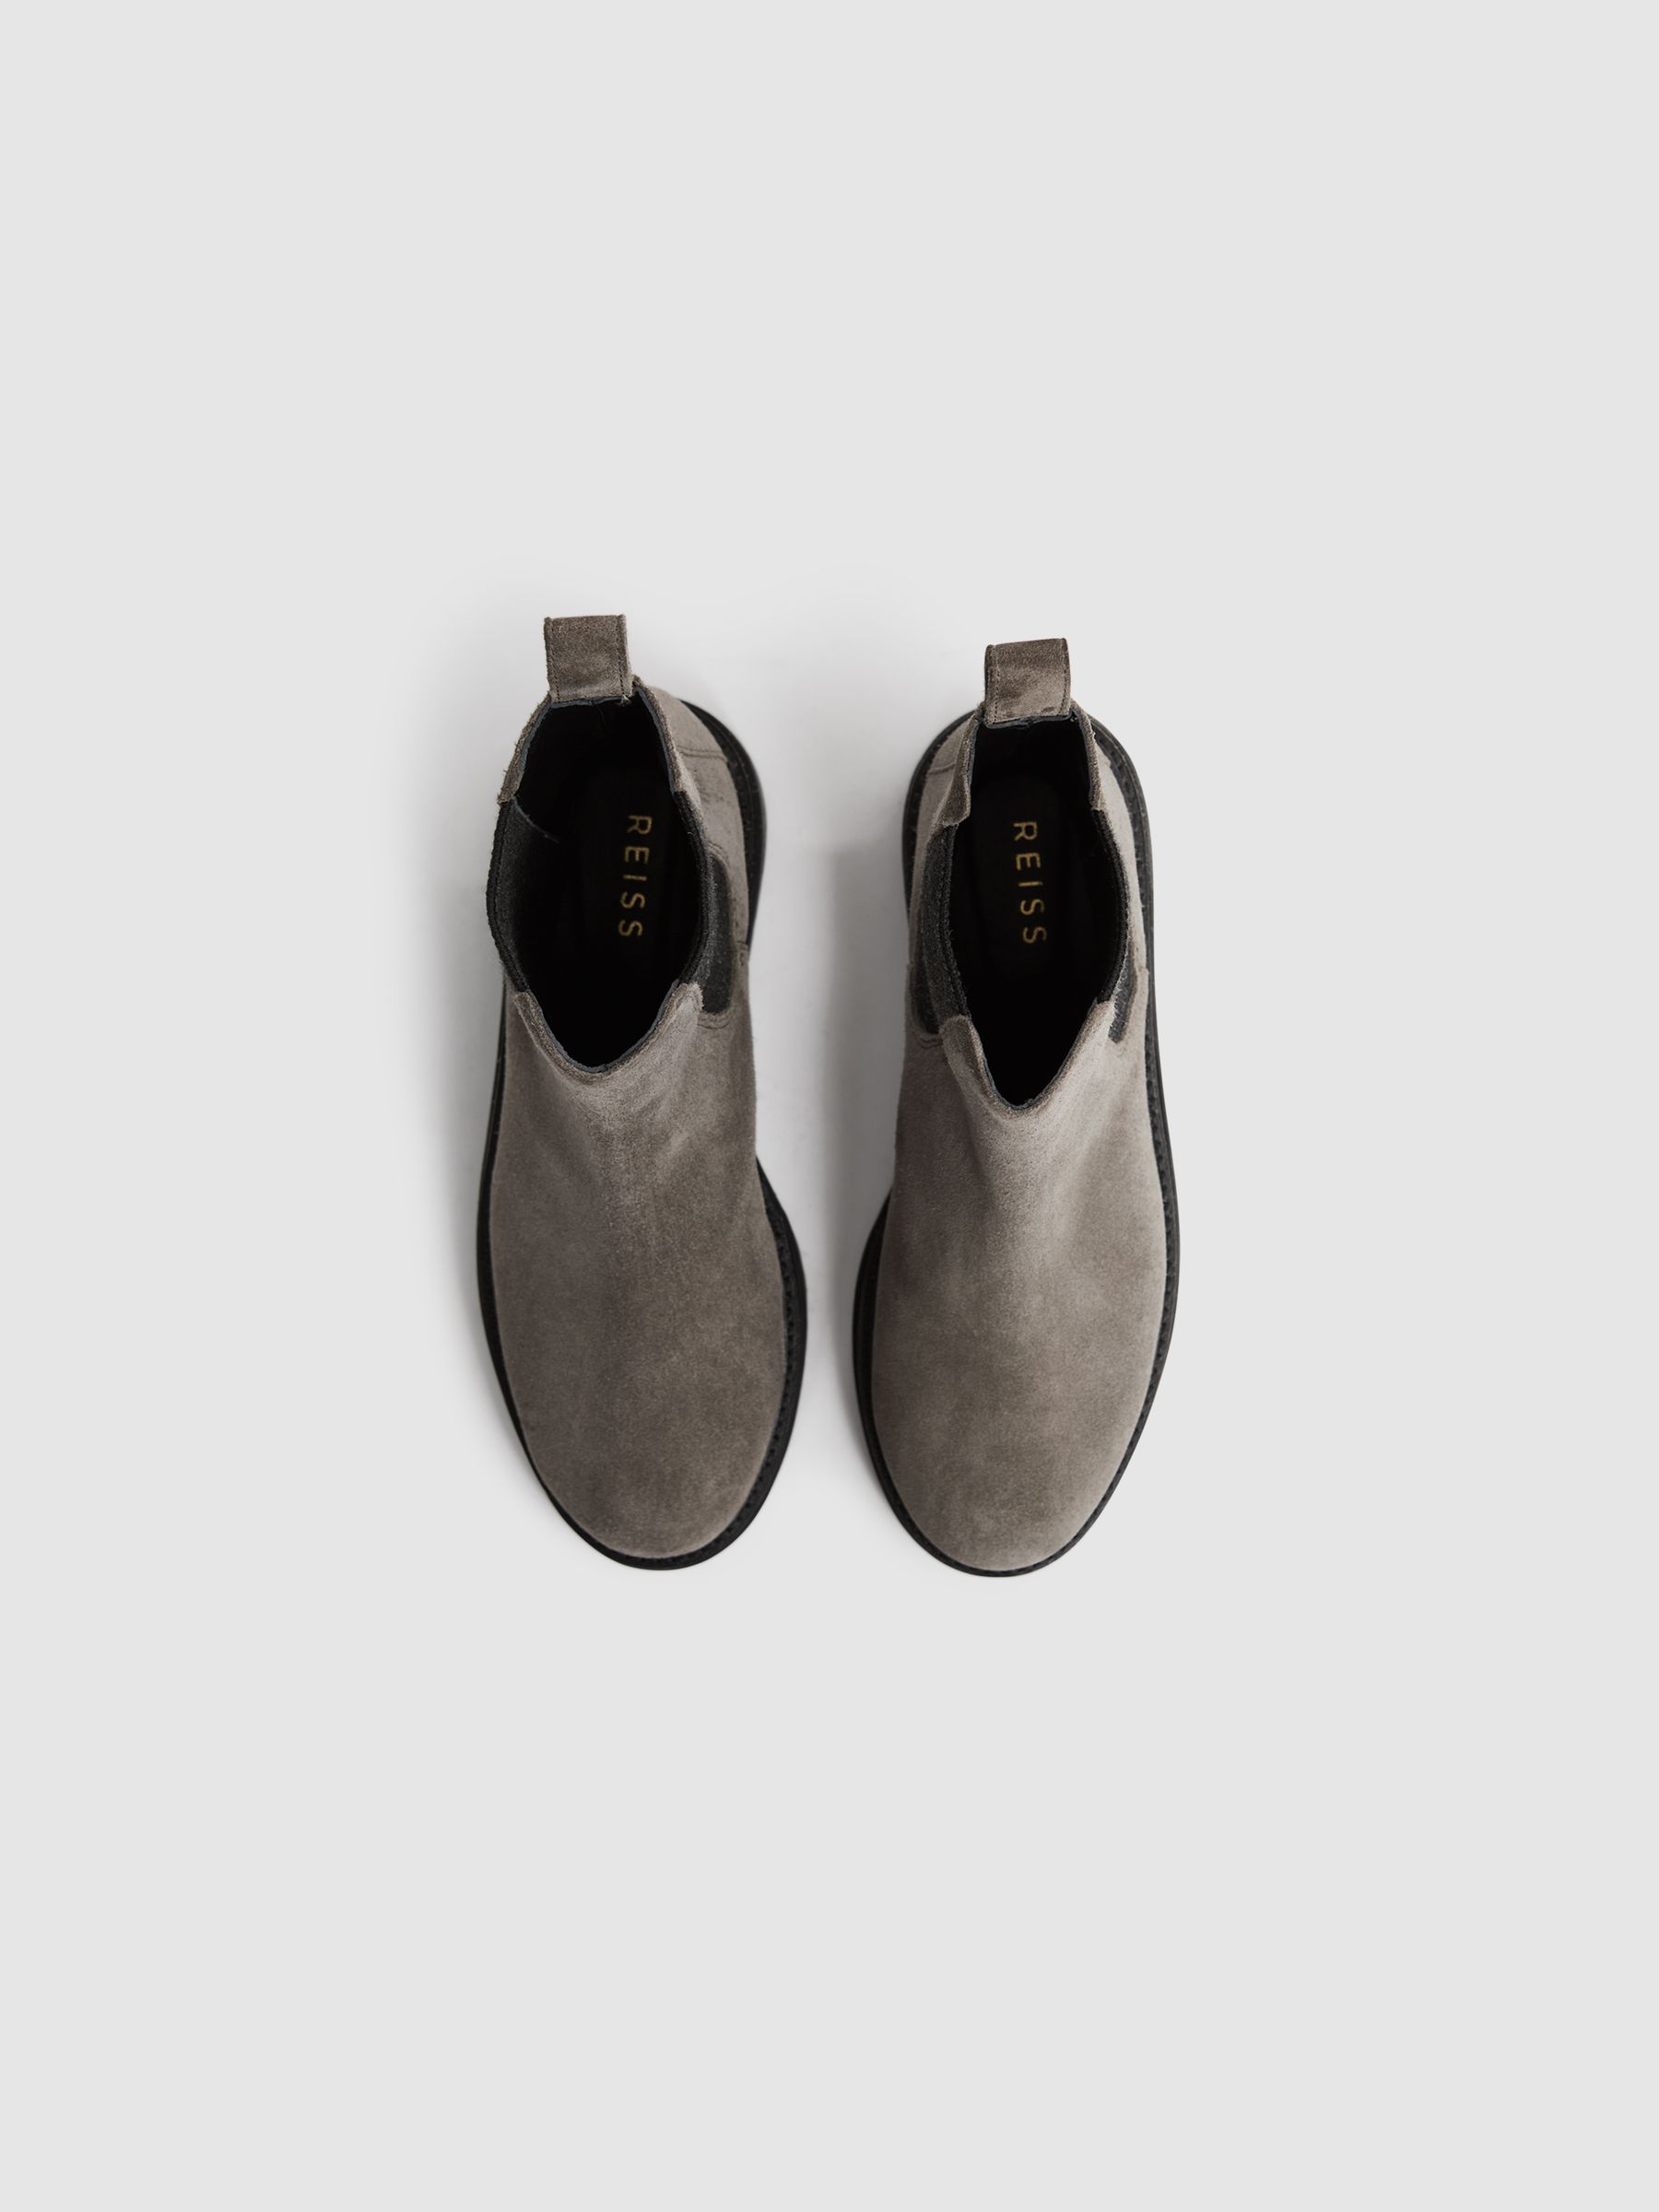 Reiss Thea Suede Chelsea Boots | REISS USA